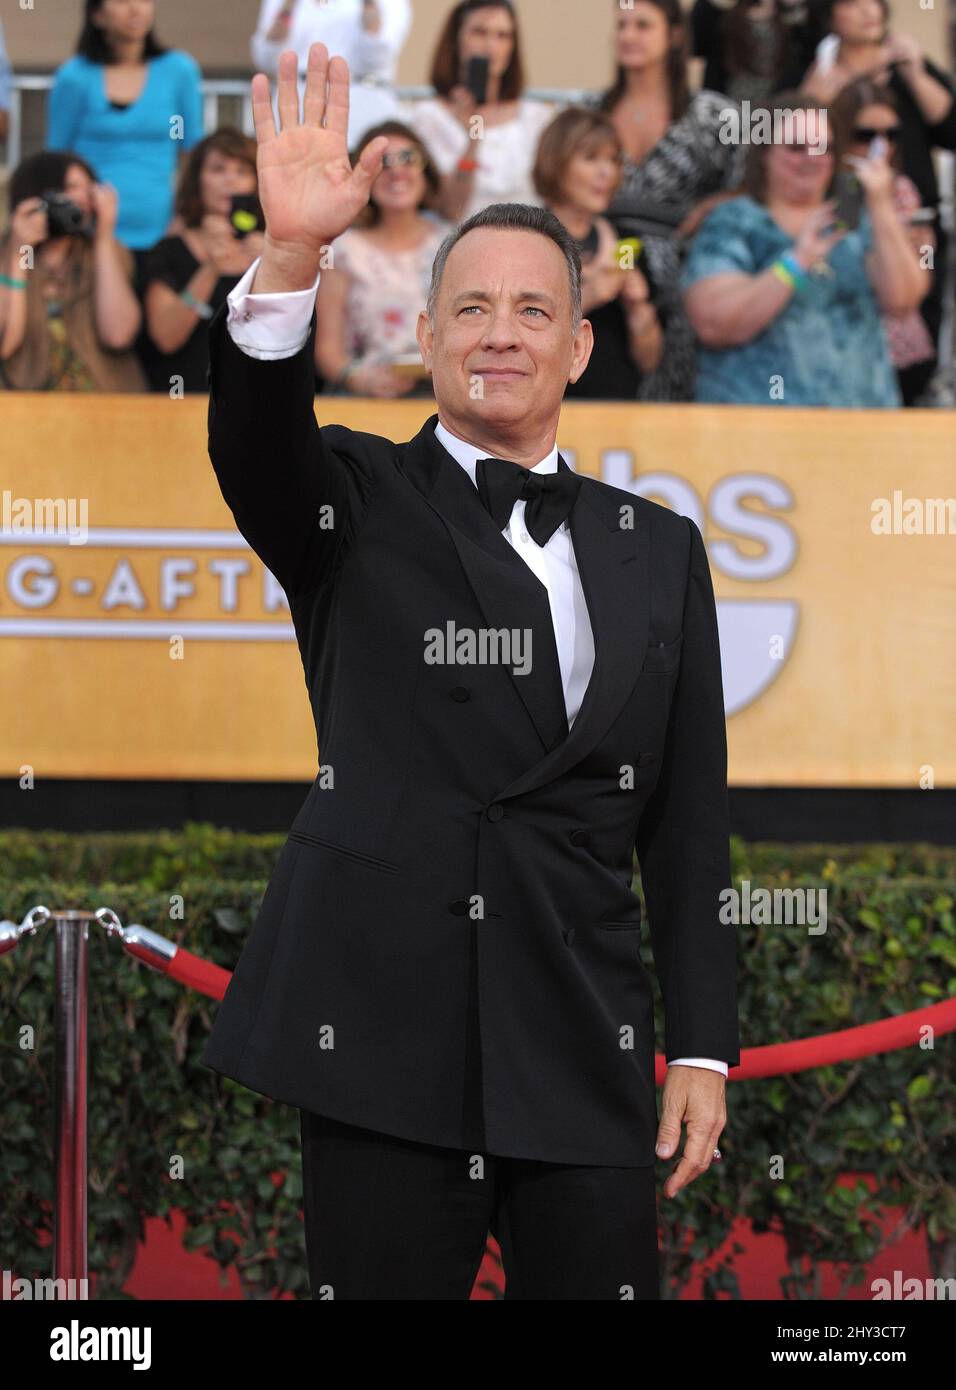 Tom Hanks attends the 20th Annual SAG Awards at Shrine Auditorium, Los Angeles, California 18th January. Stock Photo